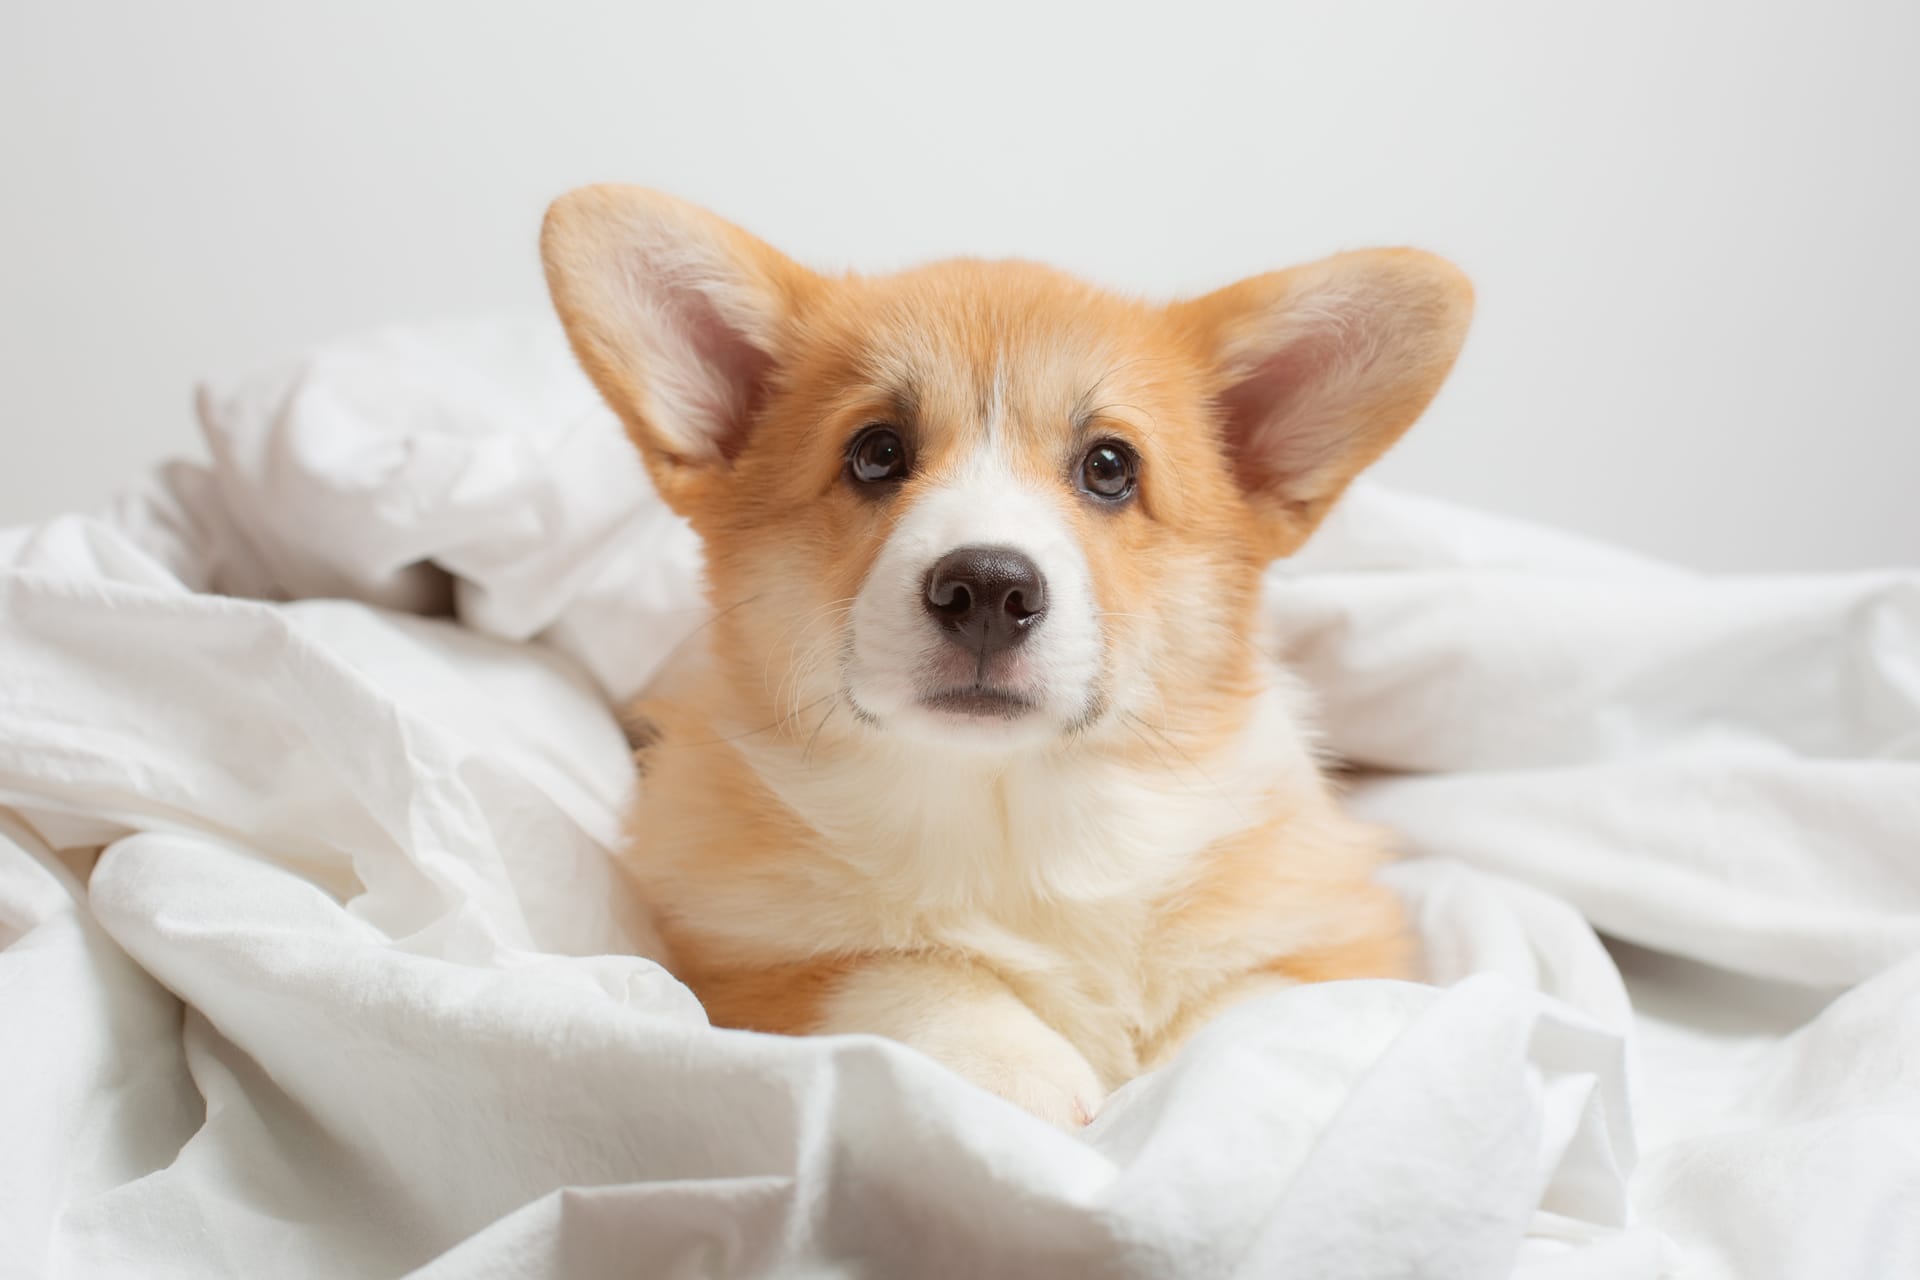 Corgi puppy lies bedroom bed covered with blanket white sheet